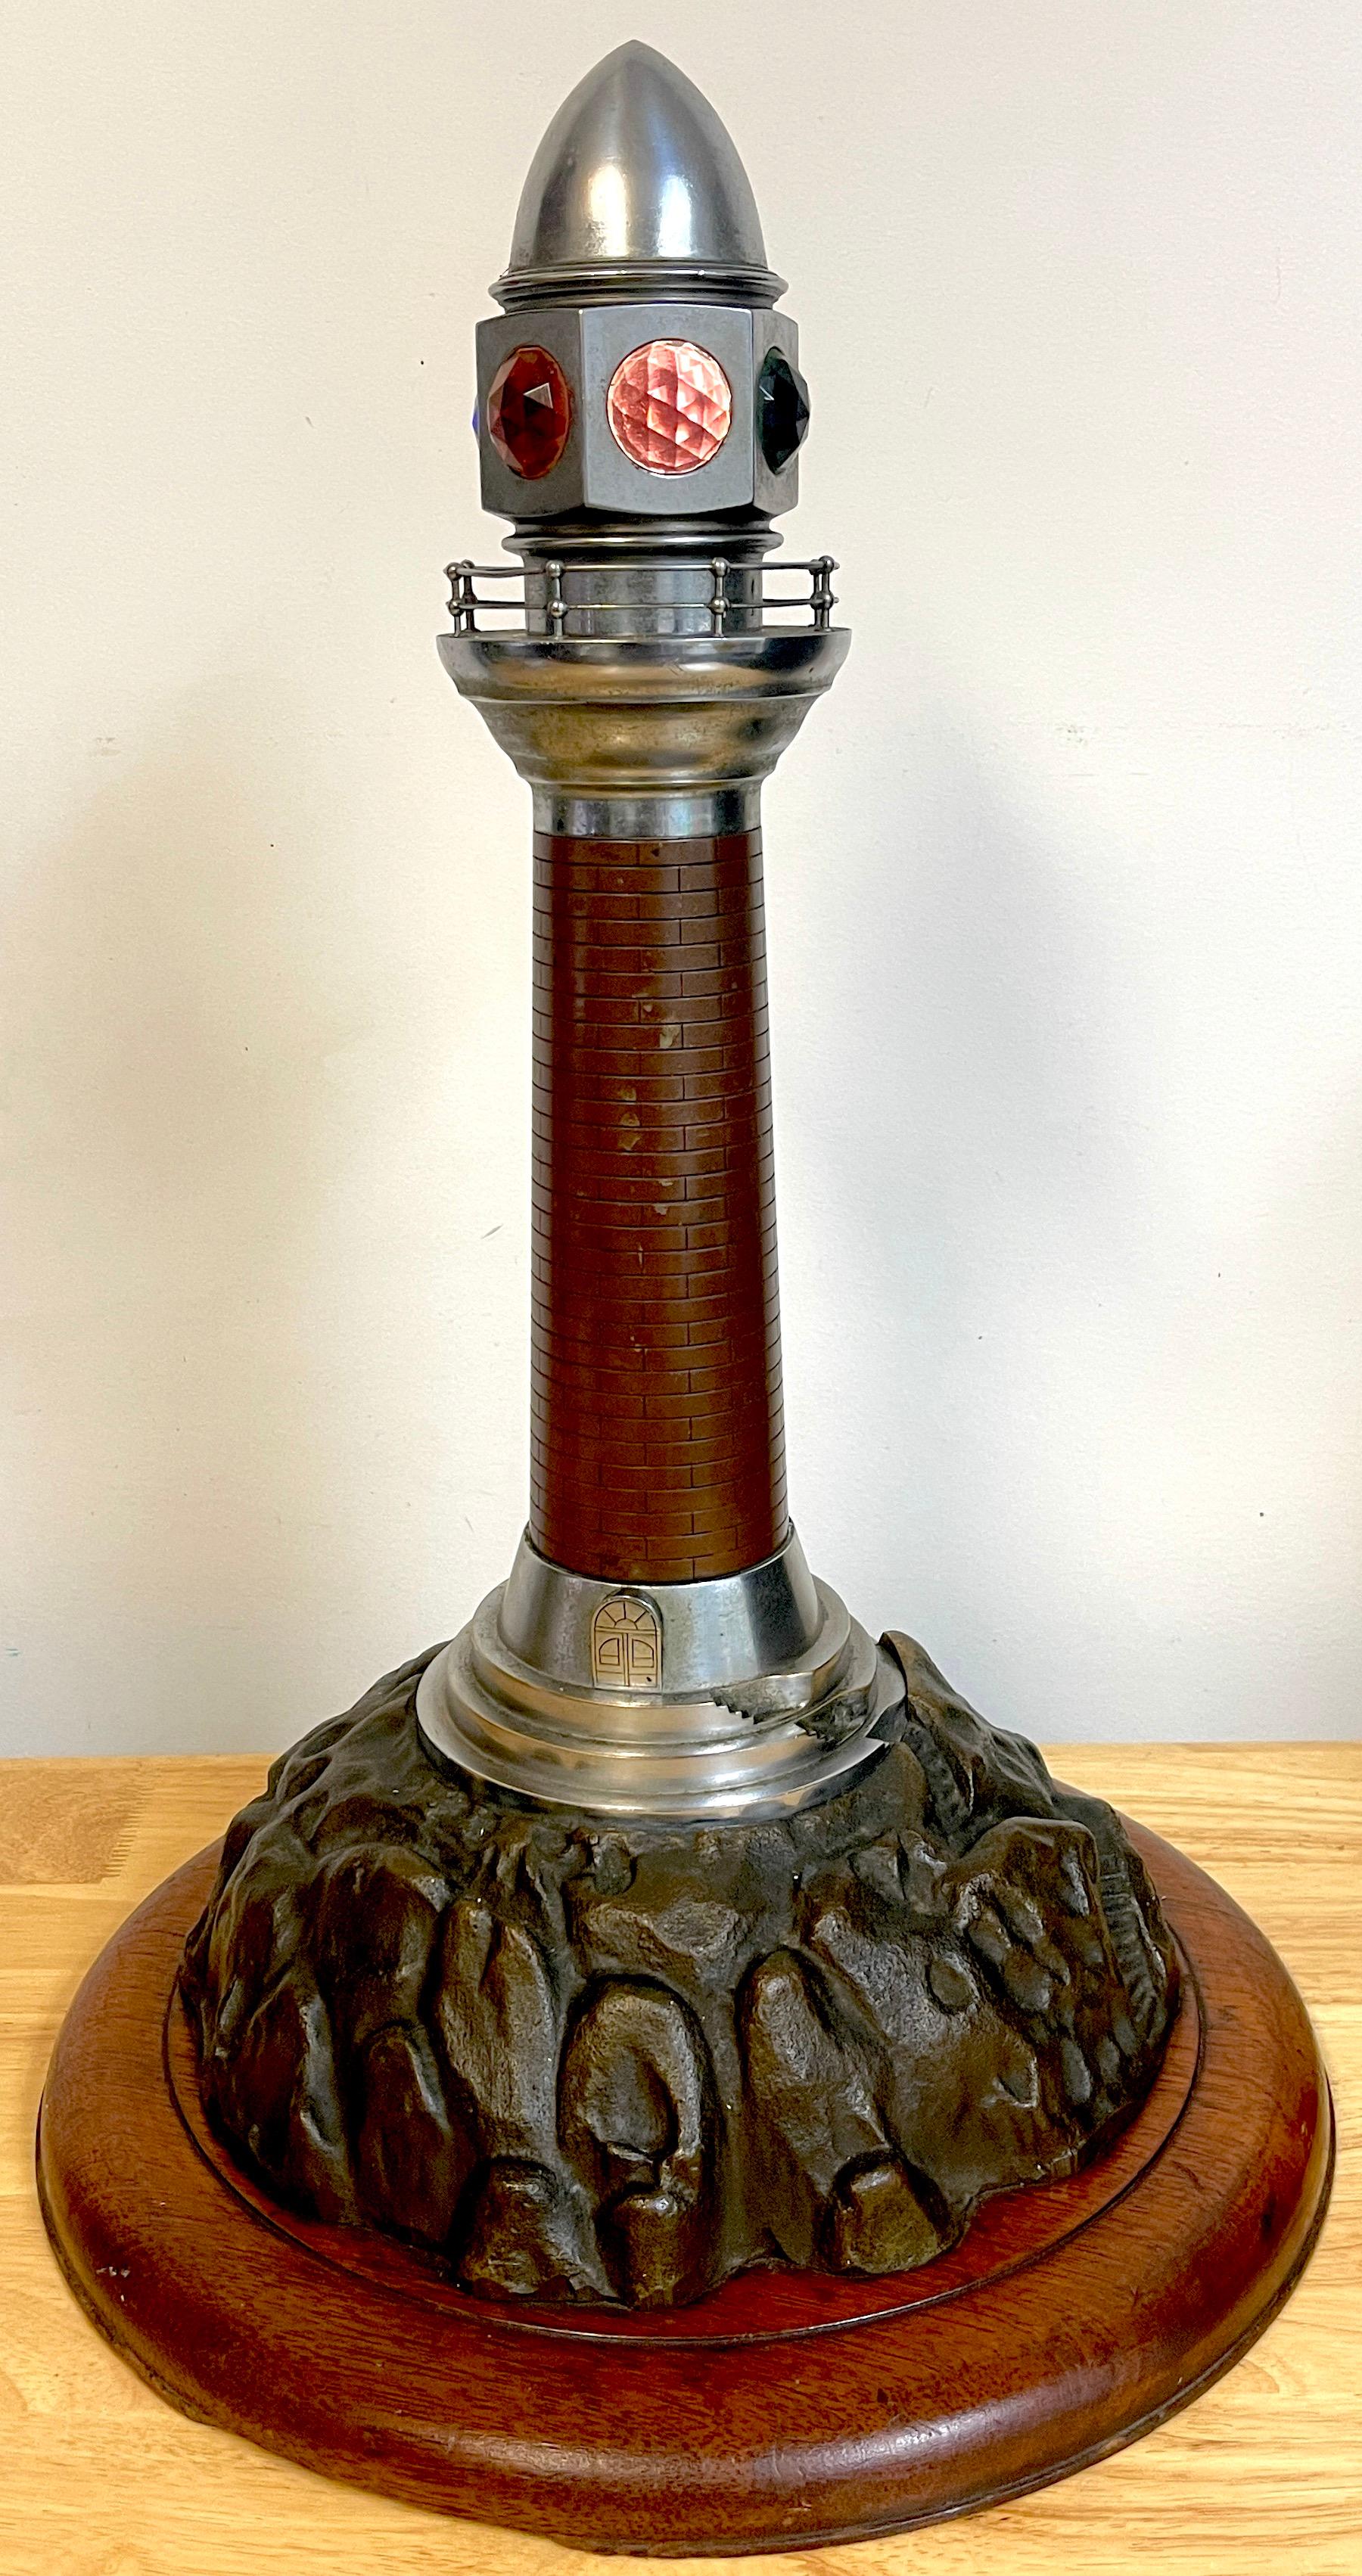 French Art Deco Bronze, Steel, Crystal and Wood Model of a Lighthouse Lamp, A substantial, intricately detailed model of a lighthouse, with inset colored cut crystal shades, on a 14